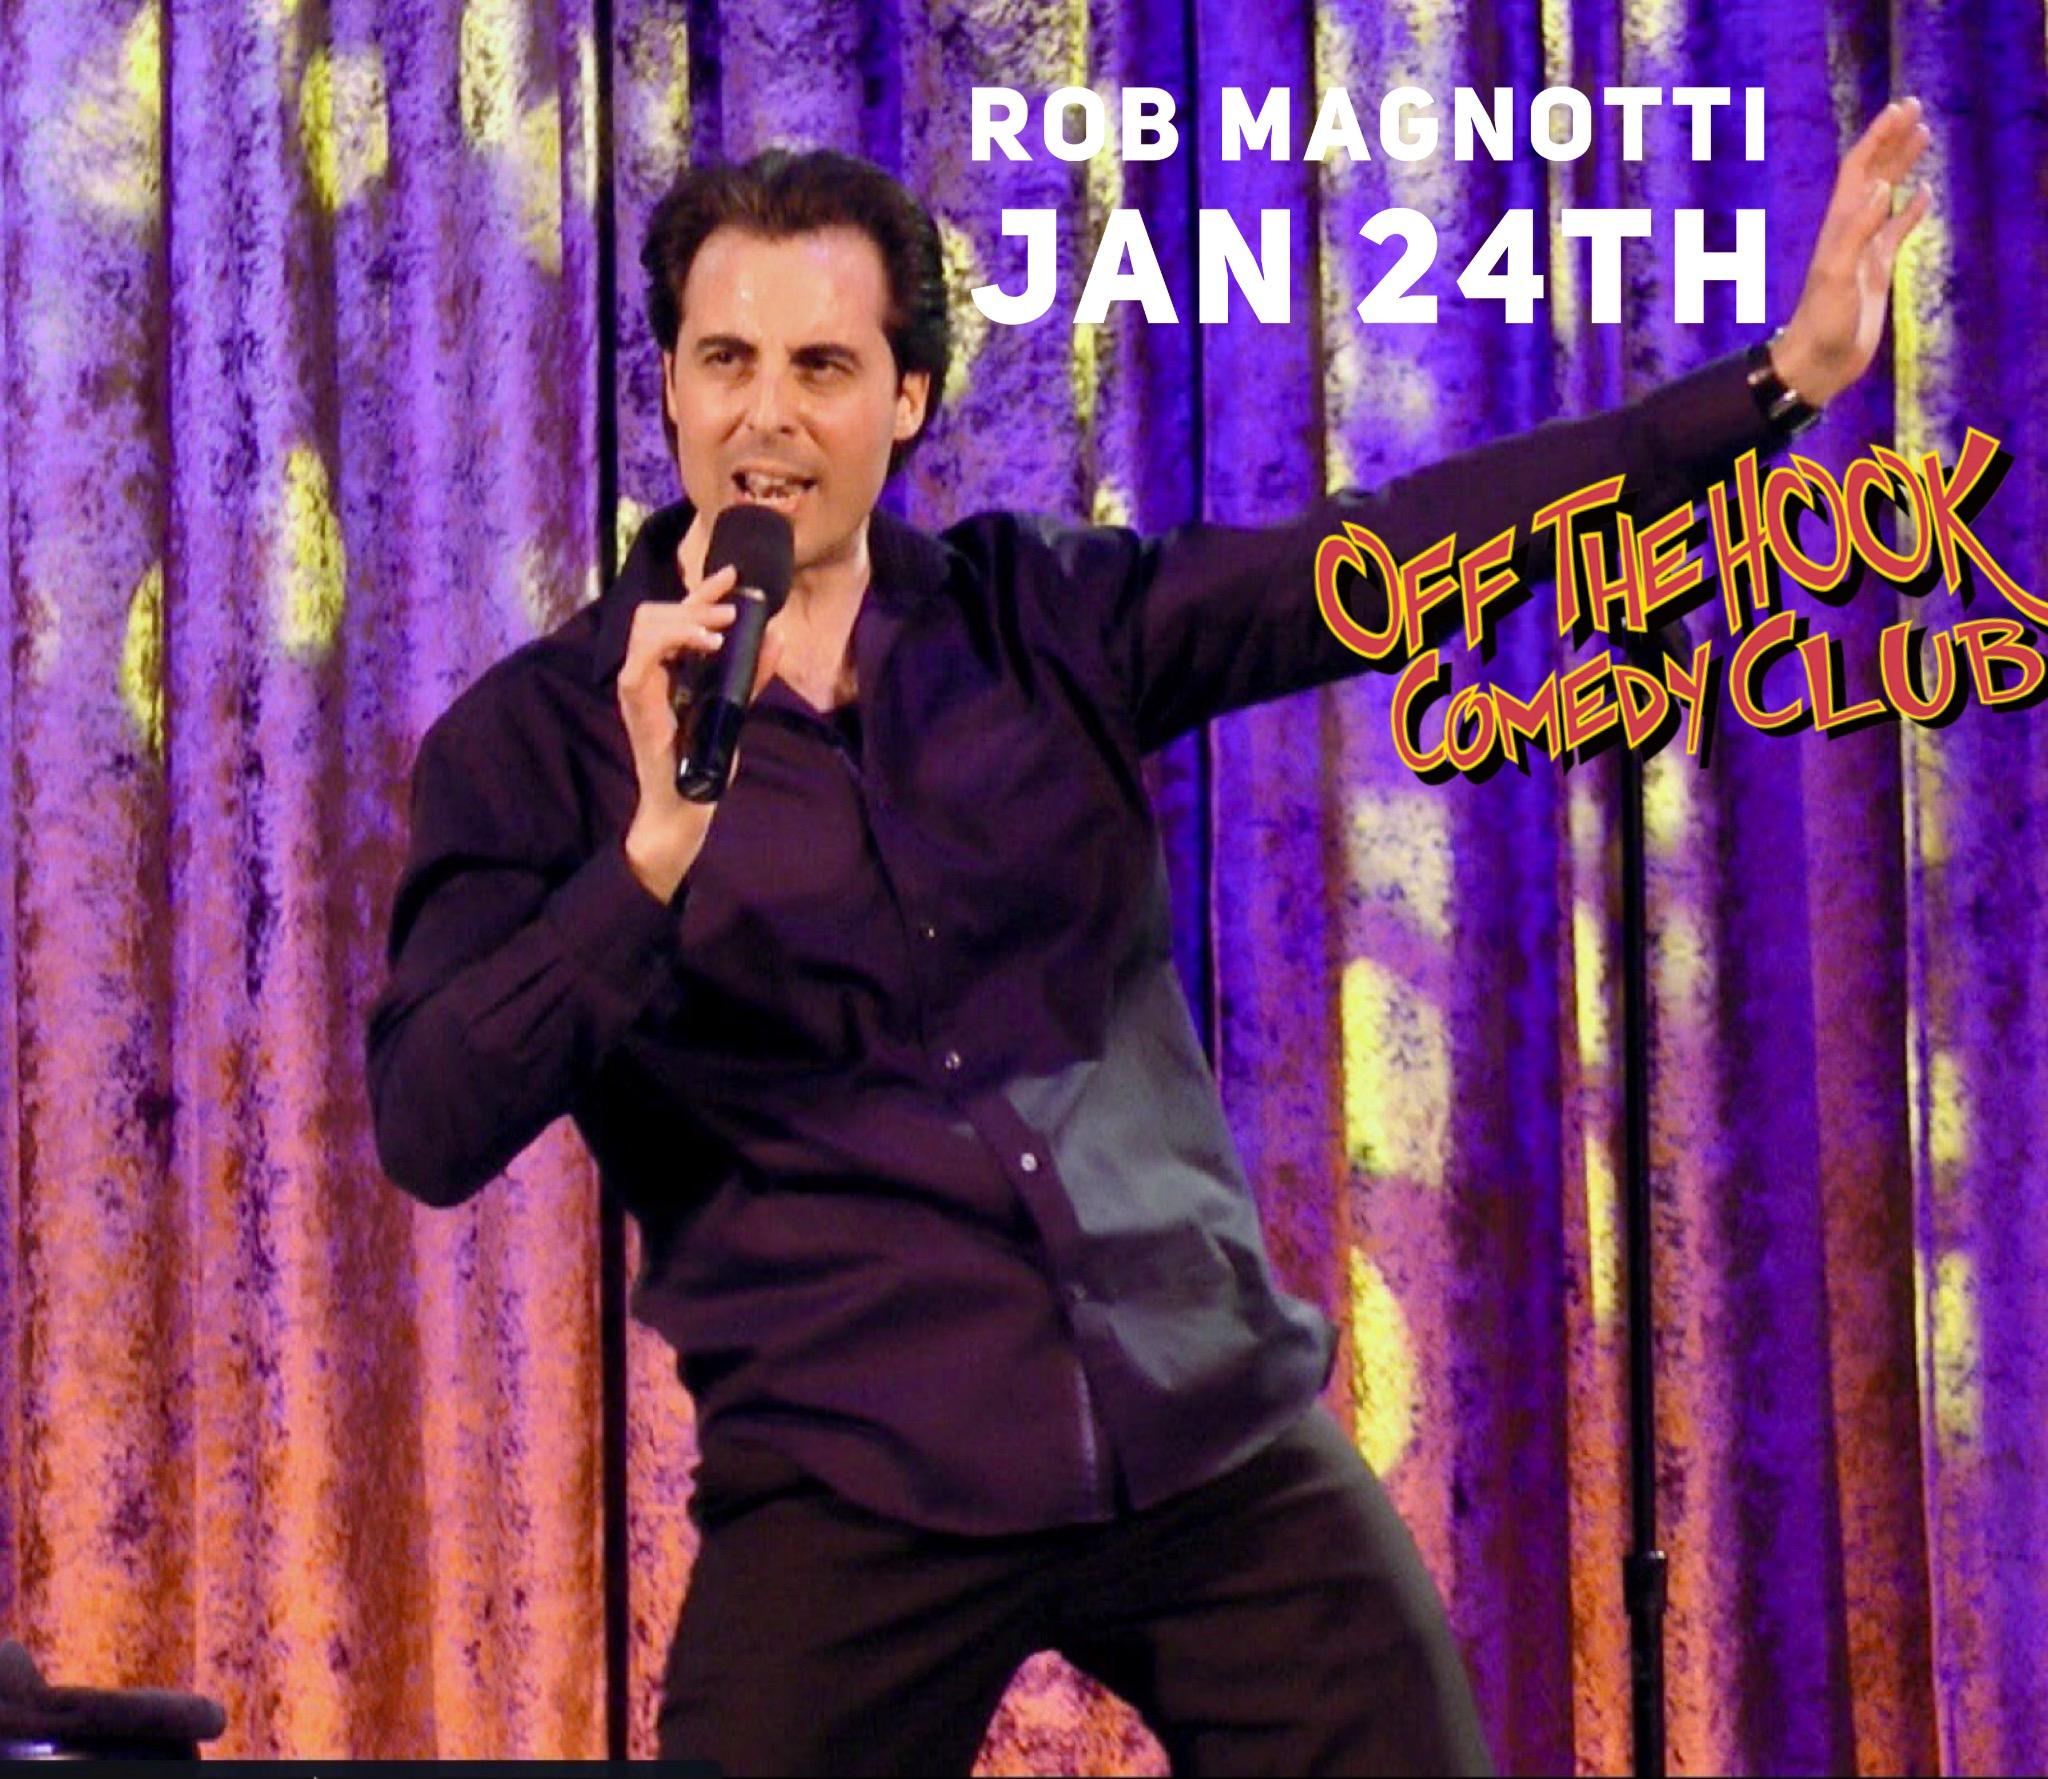 Comedian Rob Magnotti live at Off the hook comedy club